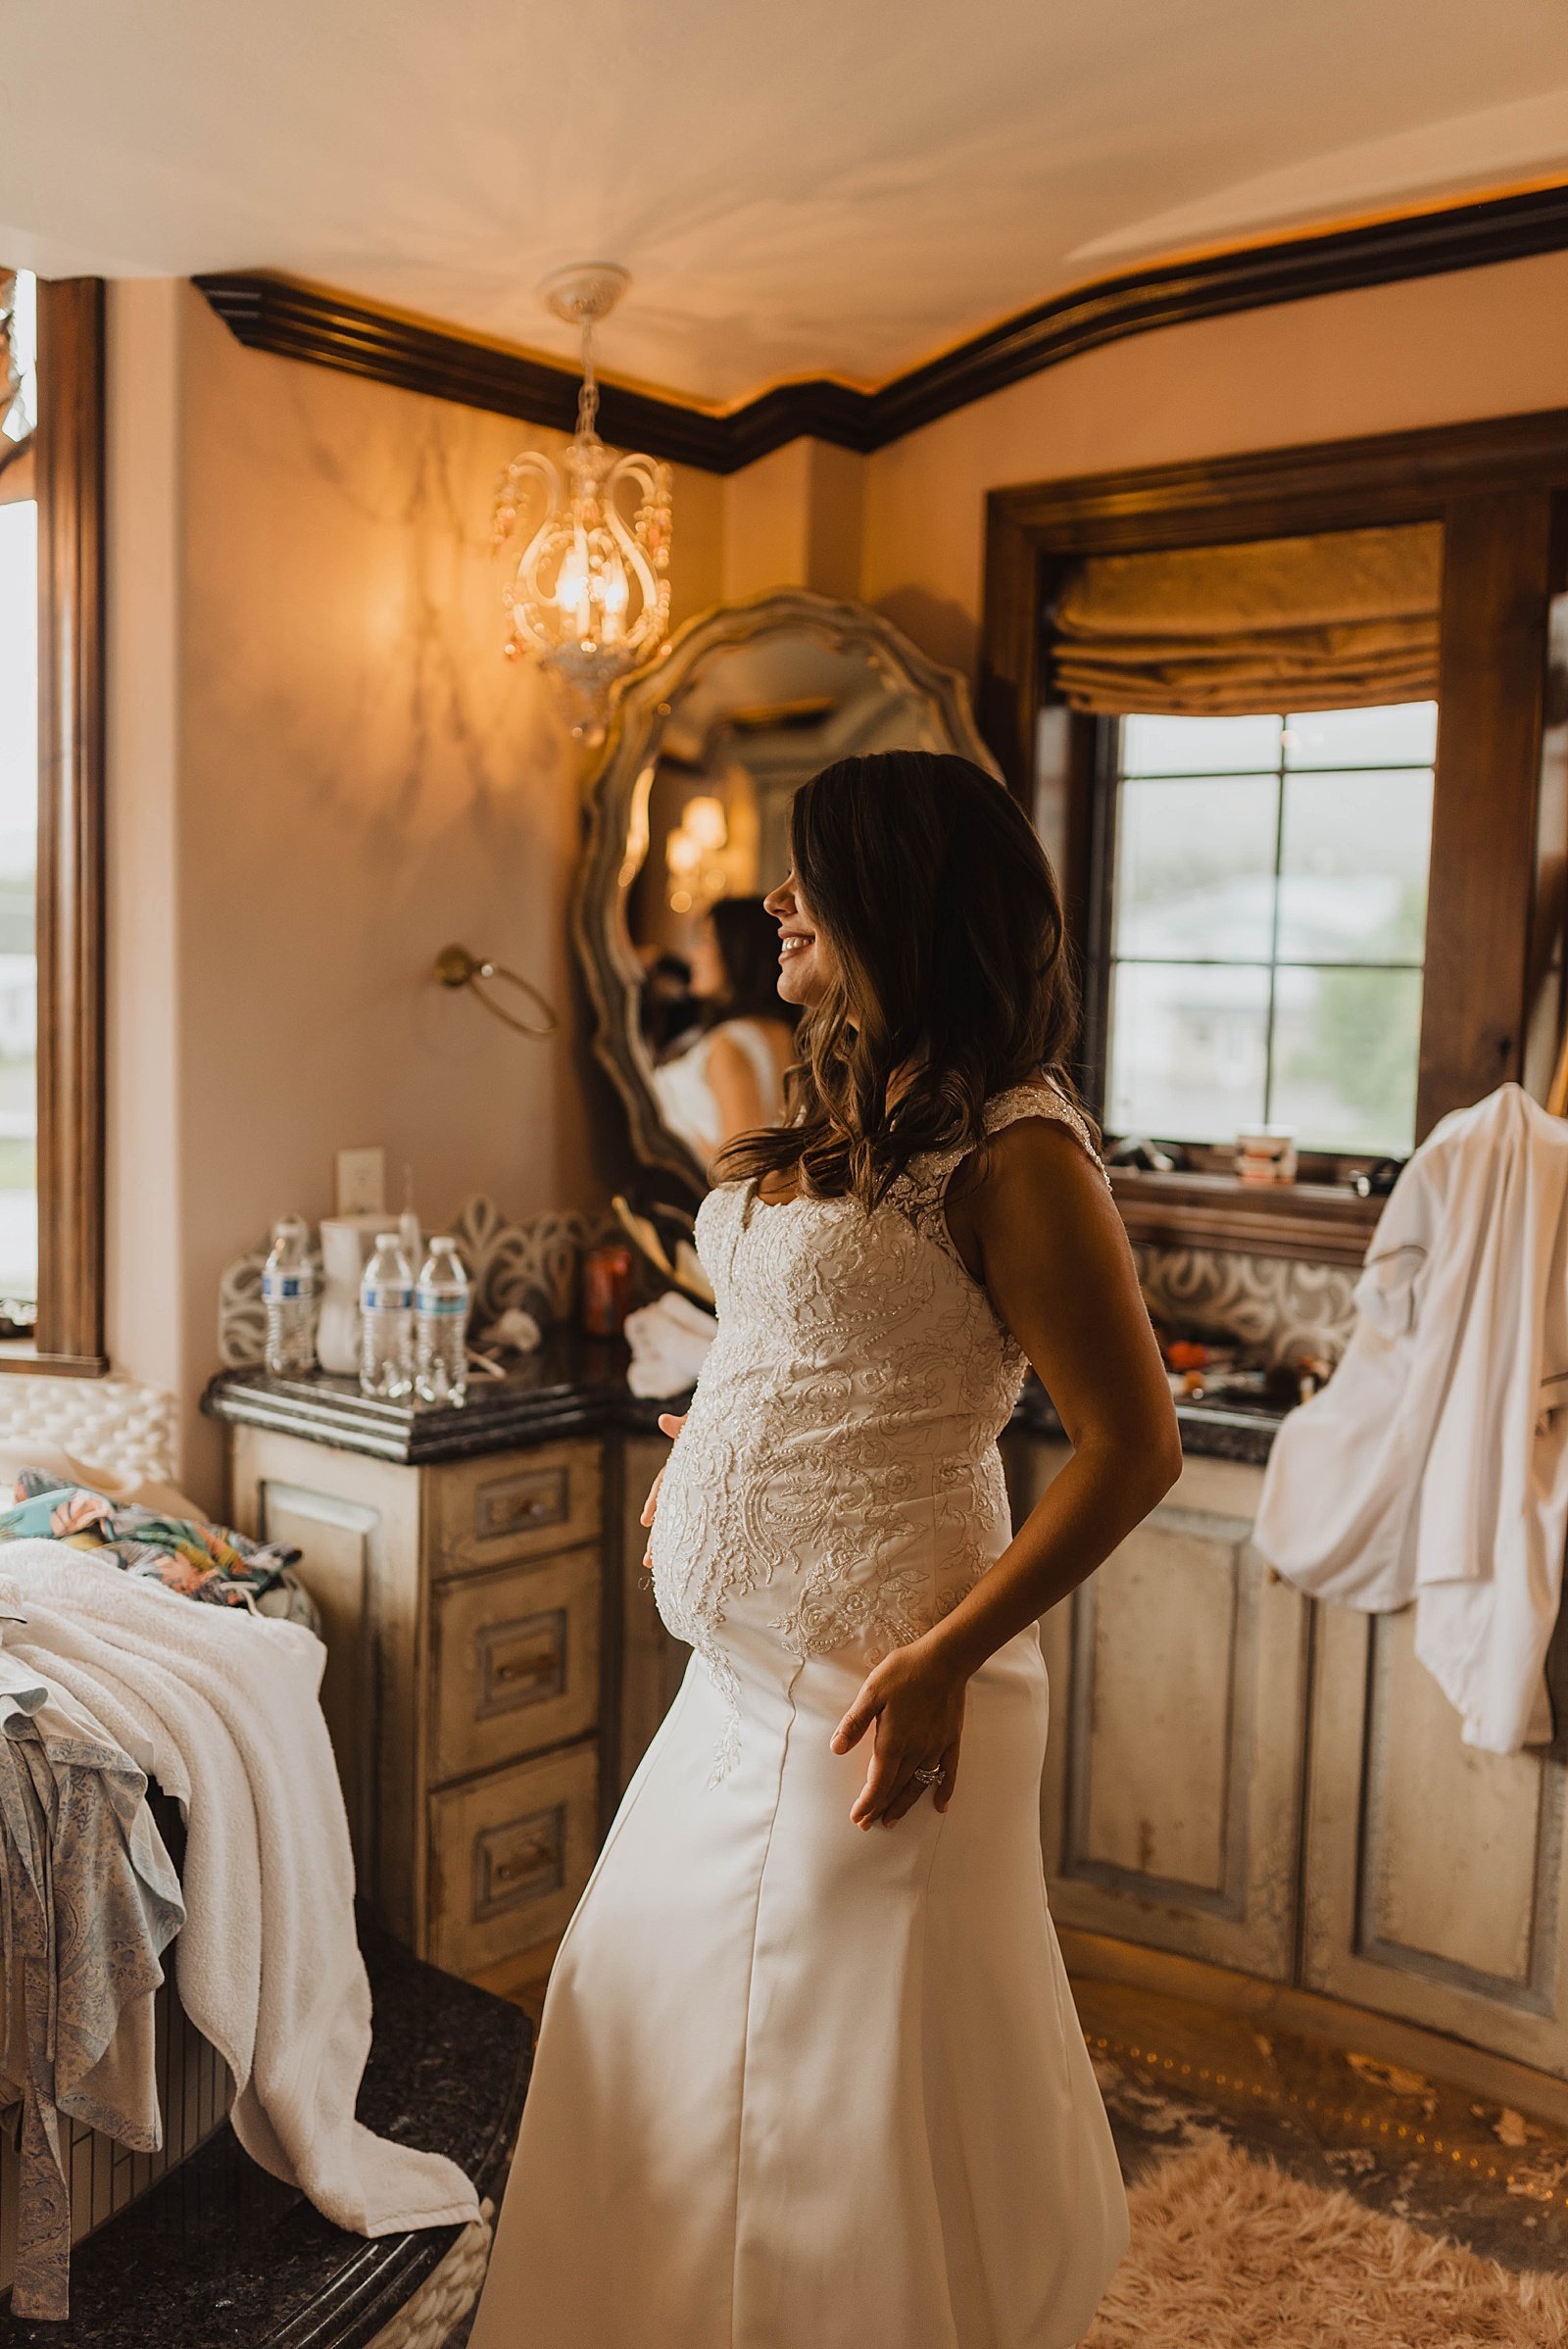  Pregnant bride next to a window in her getting ready room  